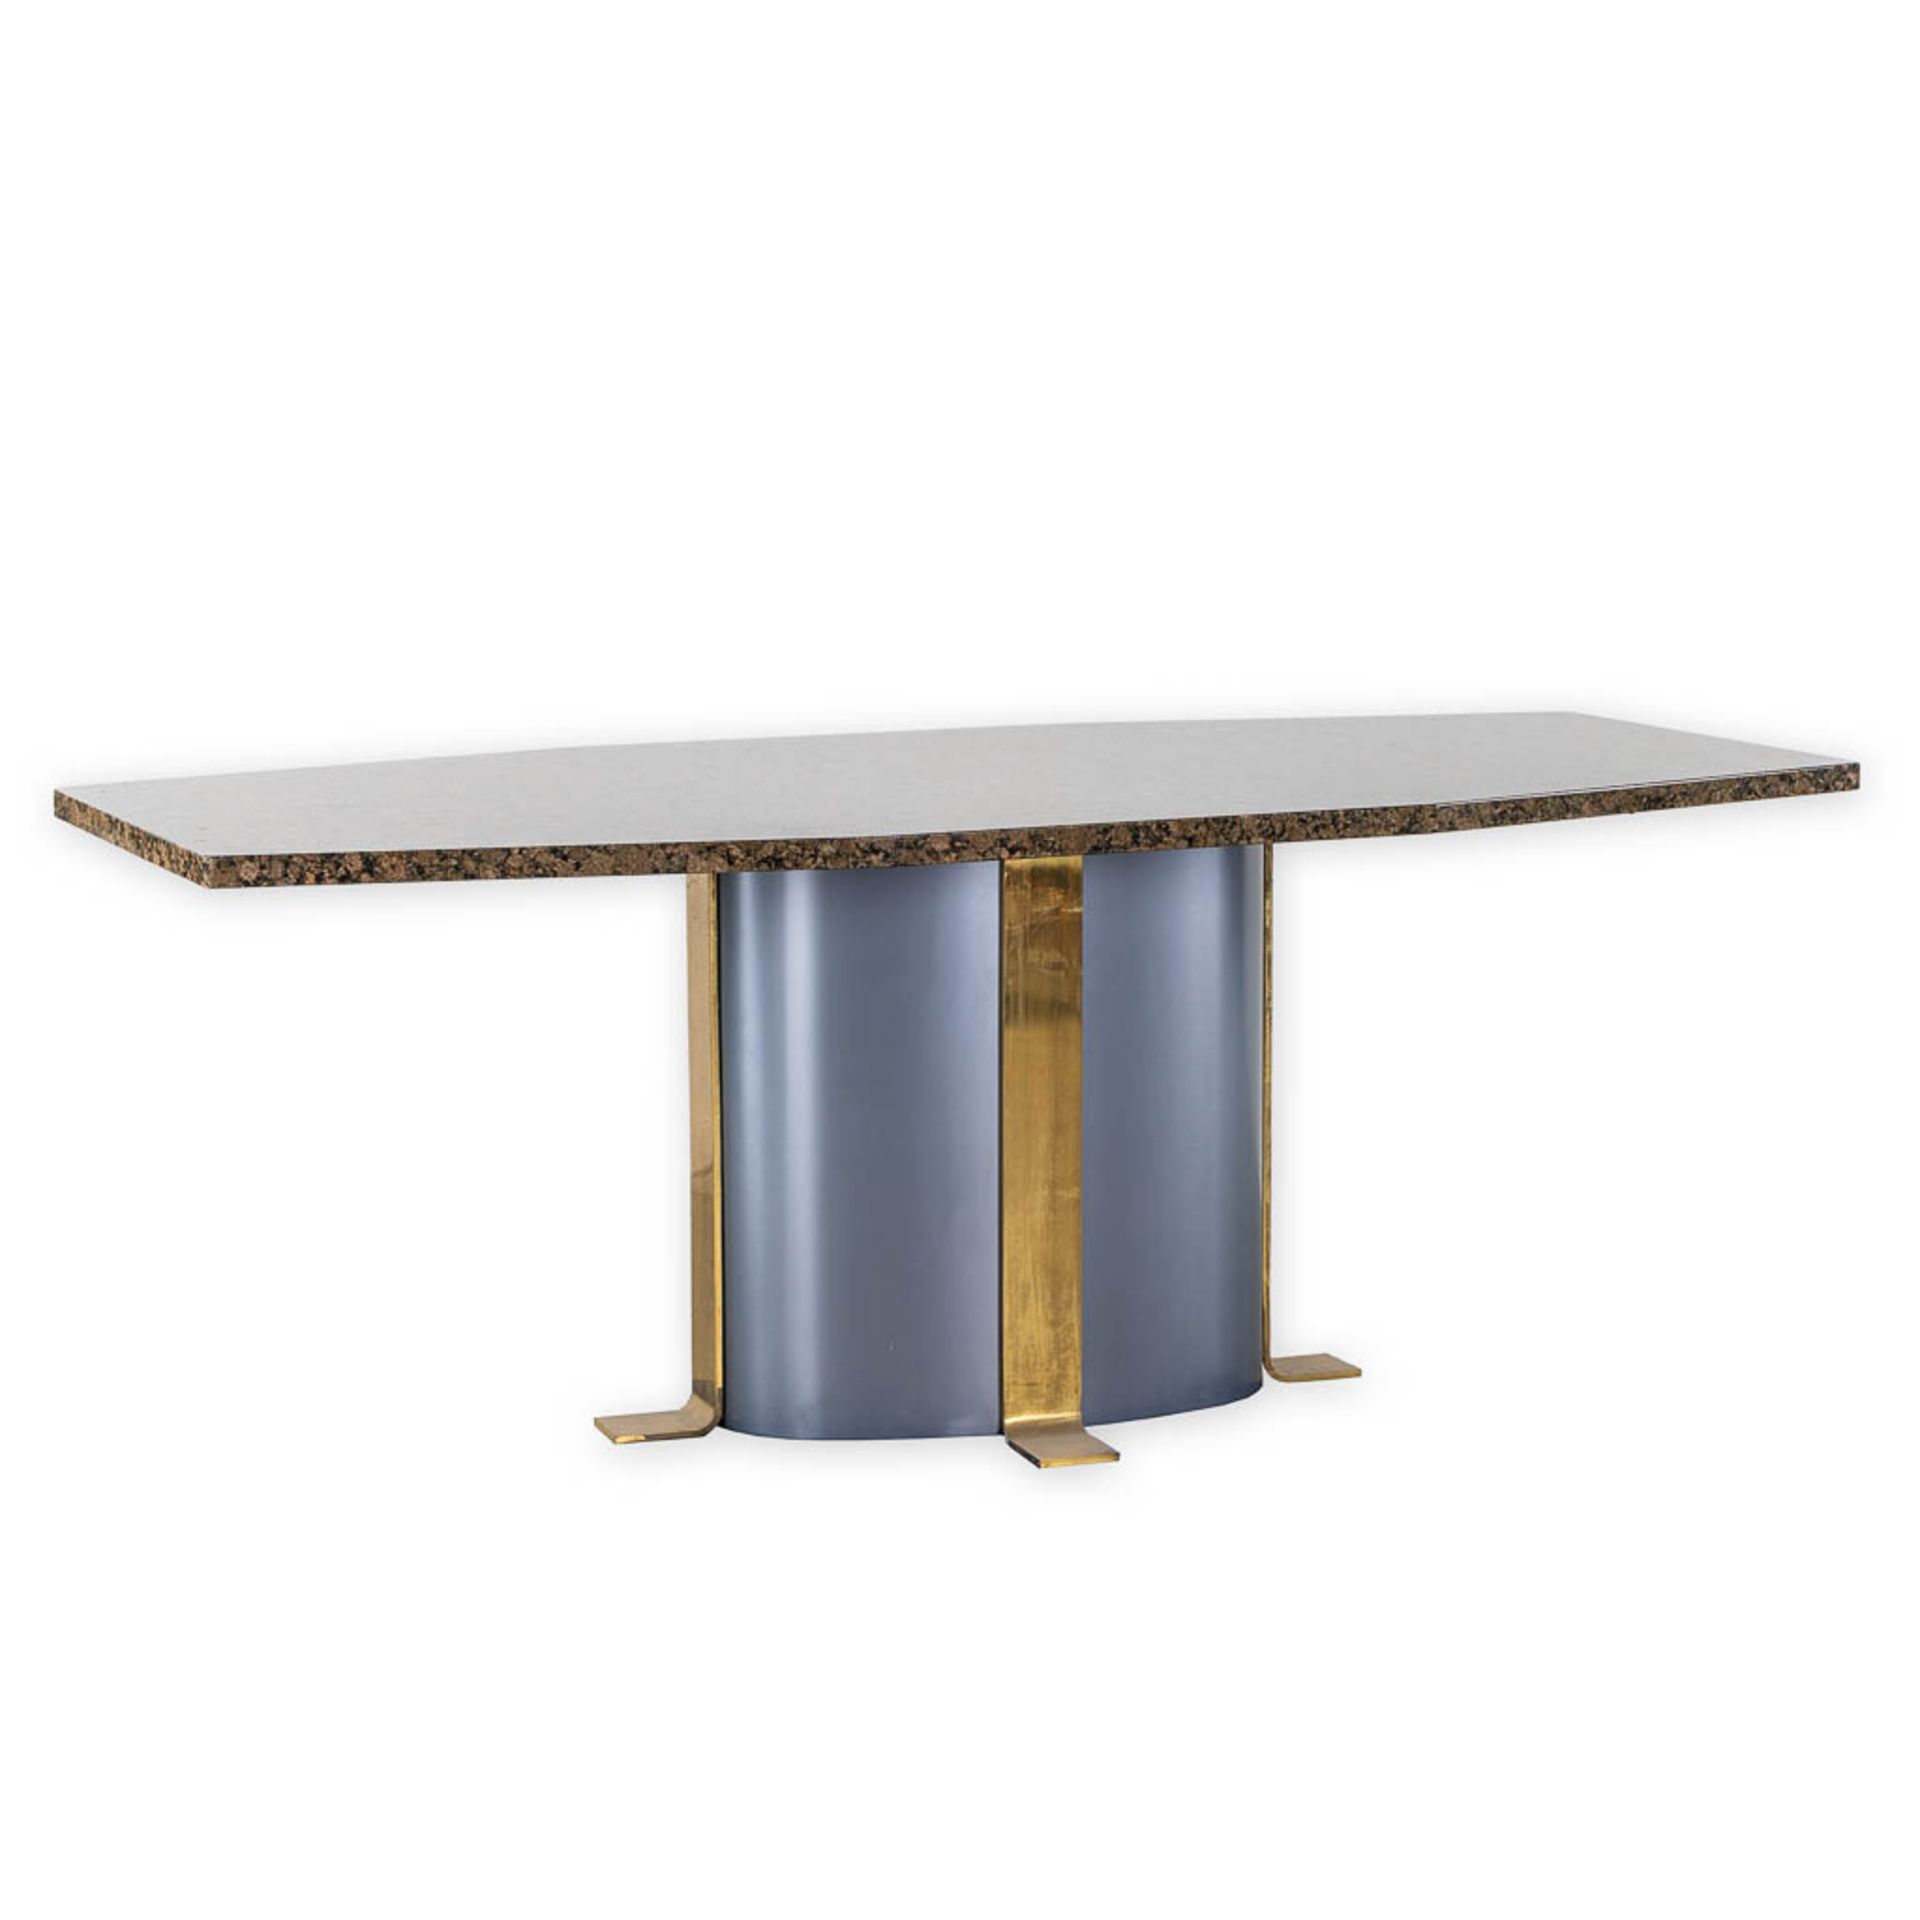 A diningroom table, bronze and patinated metal with a granite table top. (L:101 x W:210 x H:79 cm)